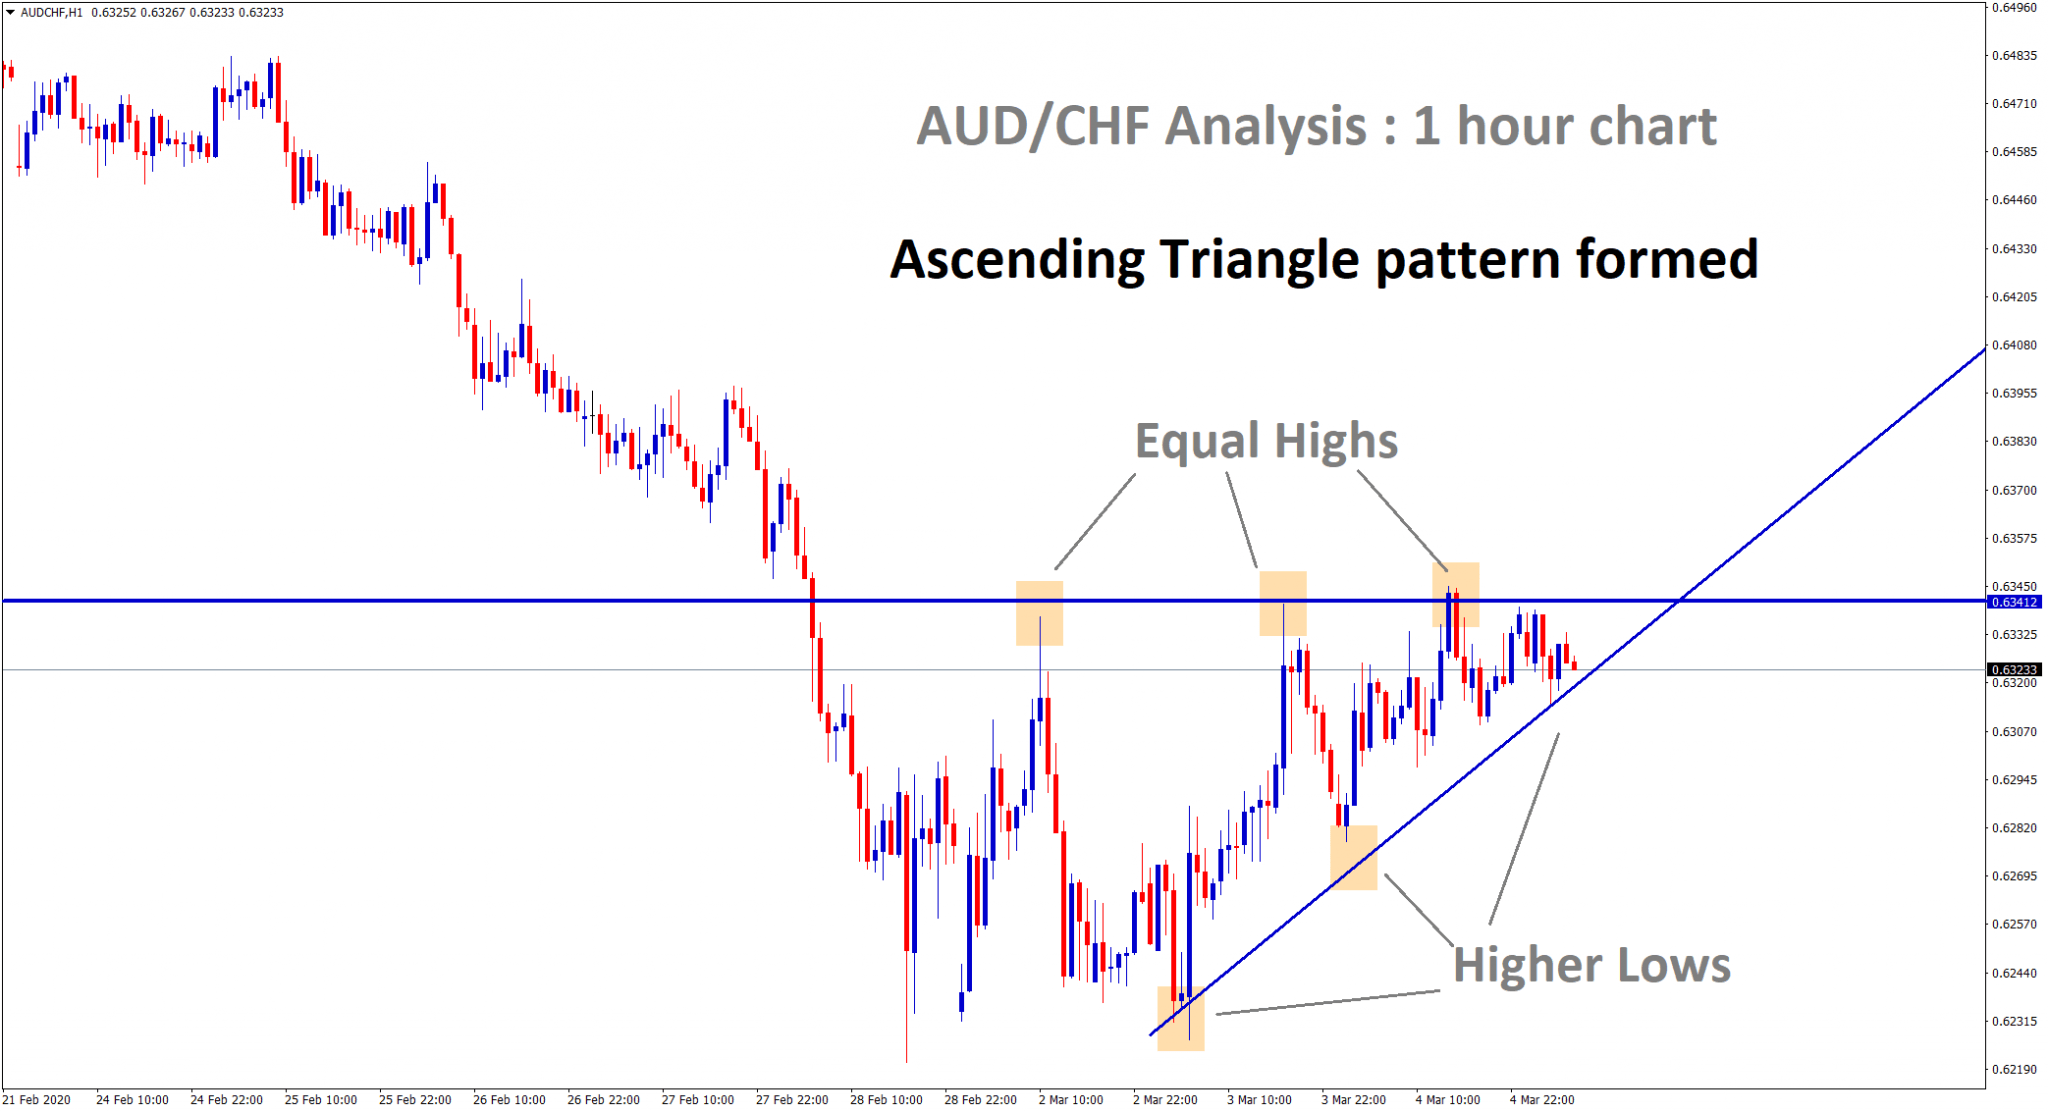 Ascending Triangle pattern found on AUD/CHF